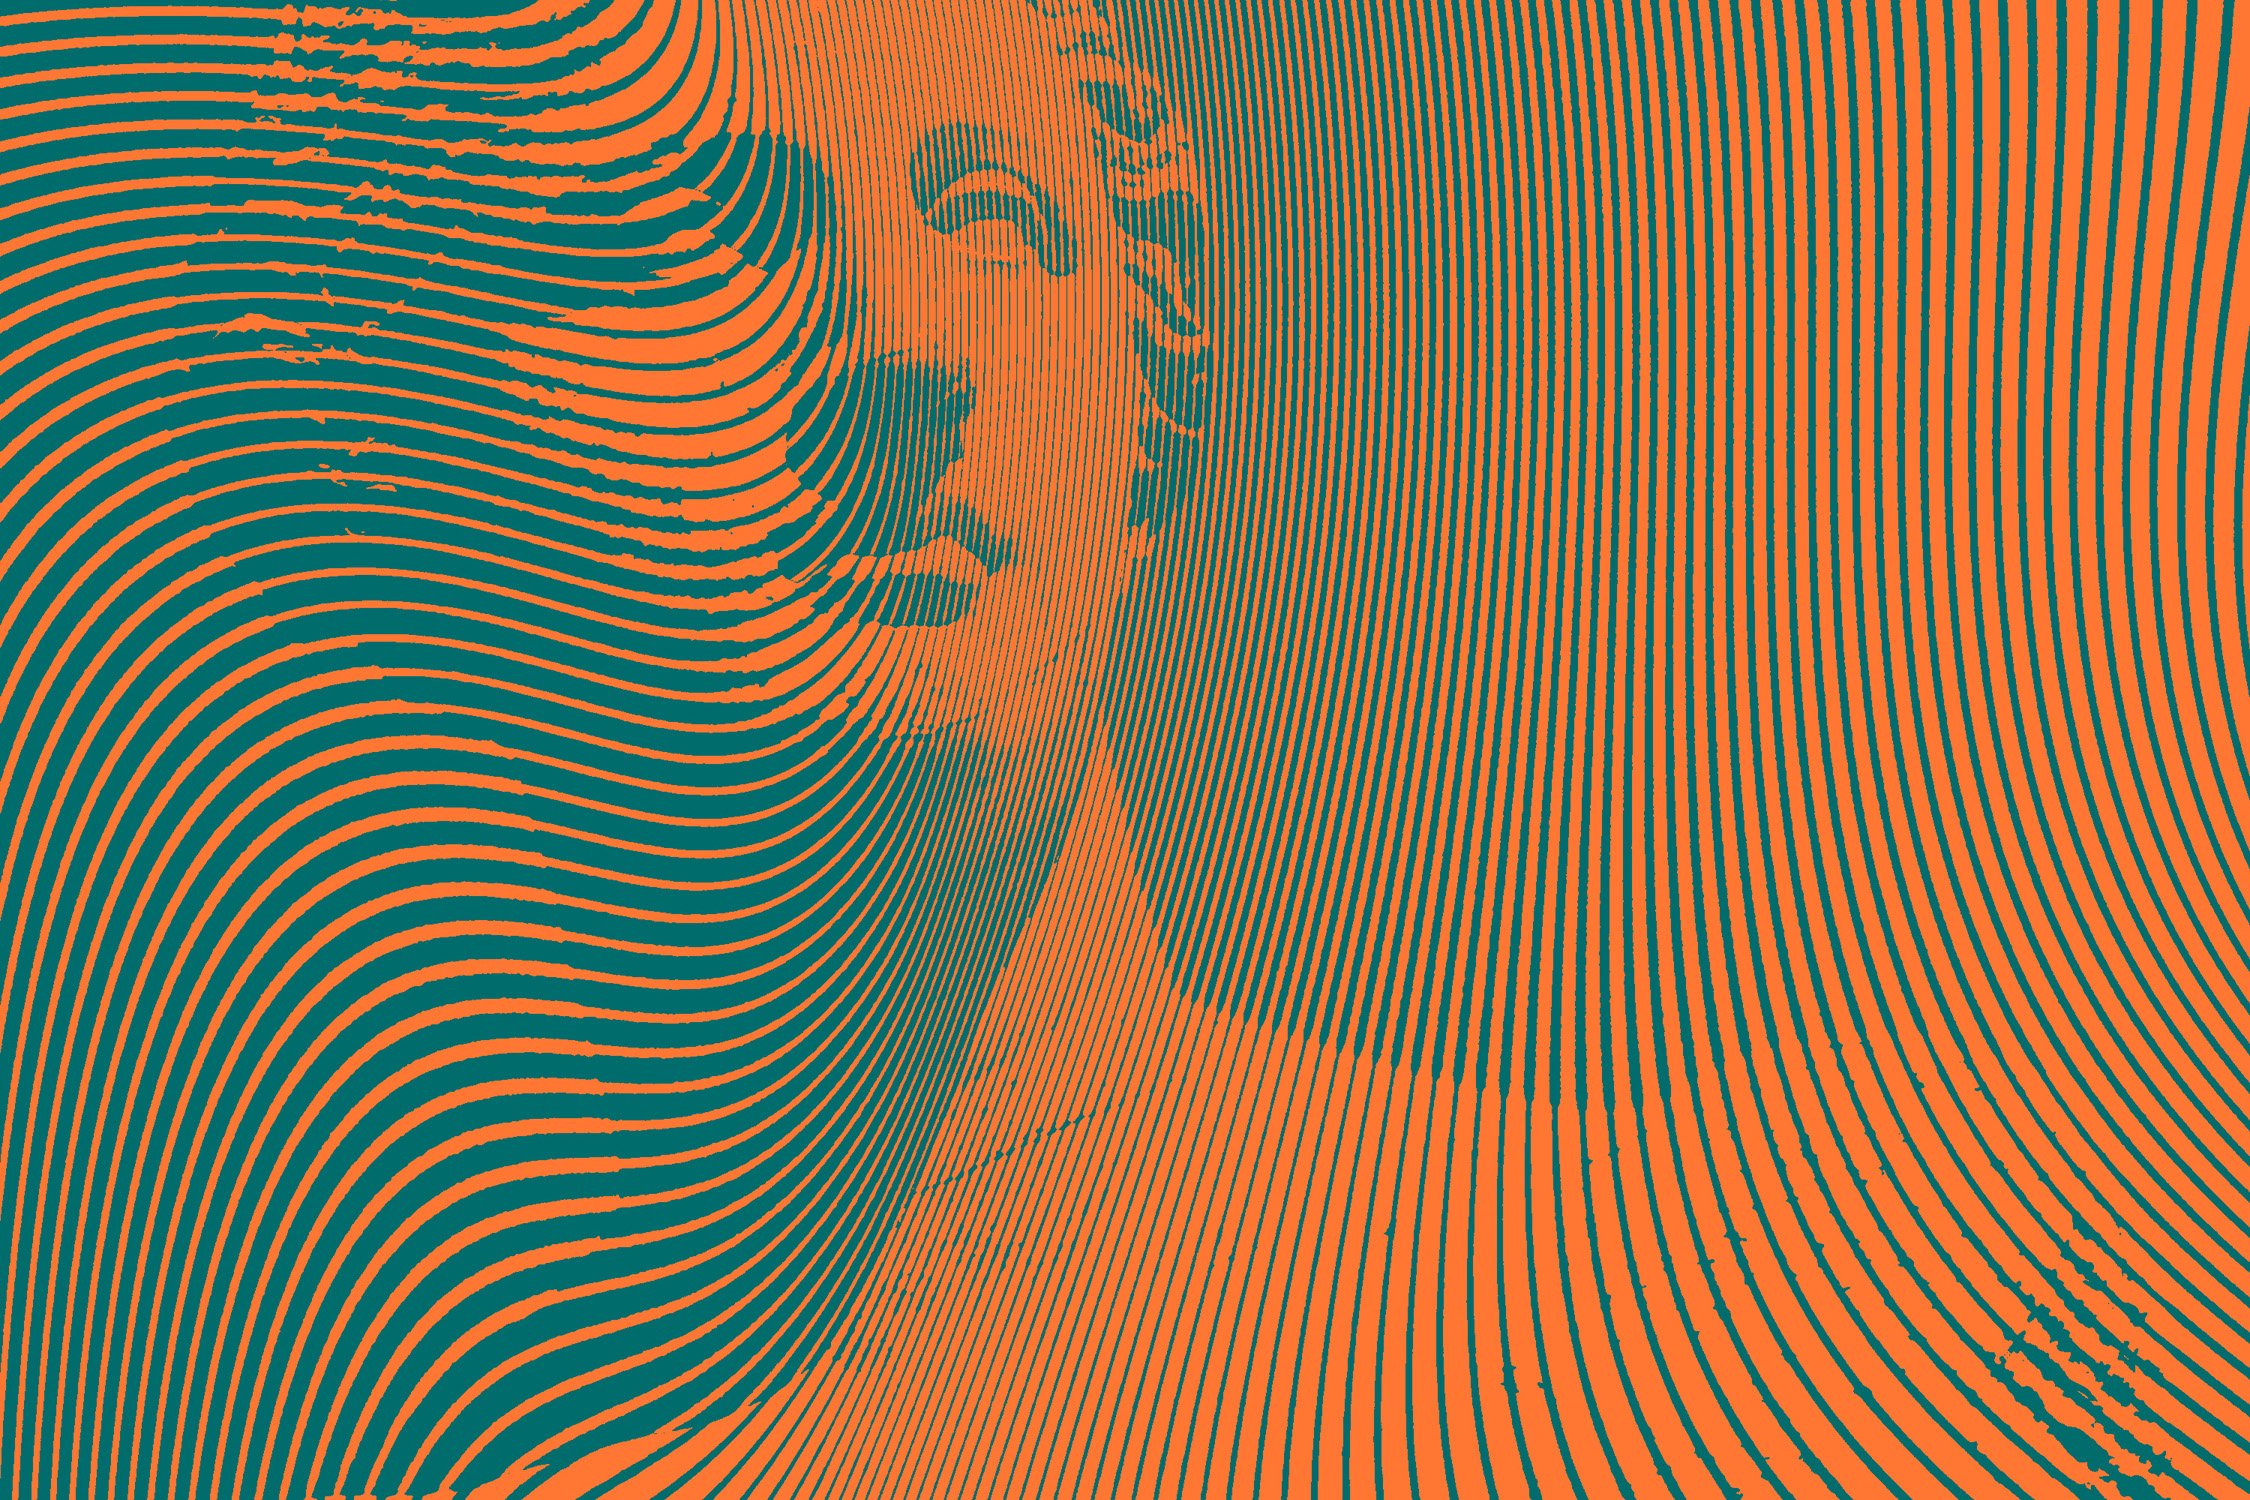 wavy lines effect for posters 04 1